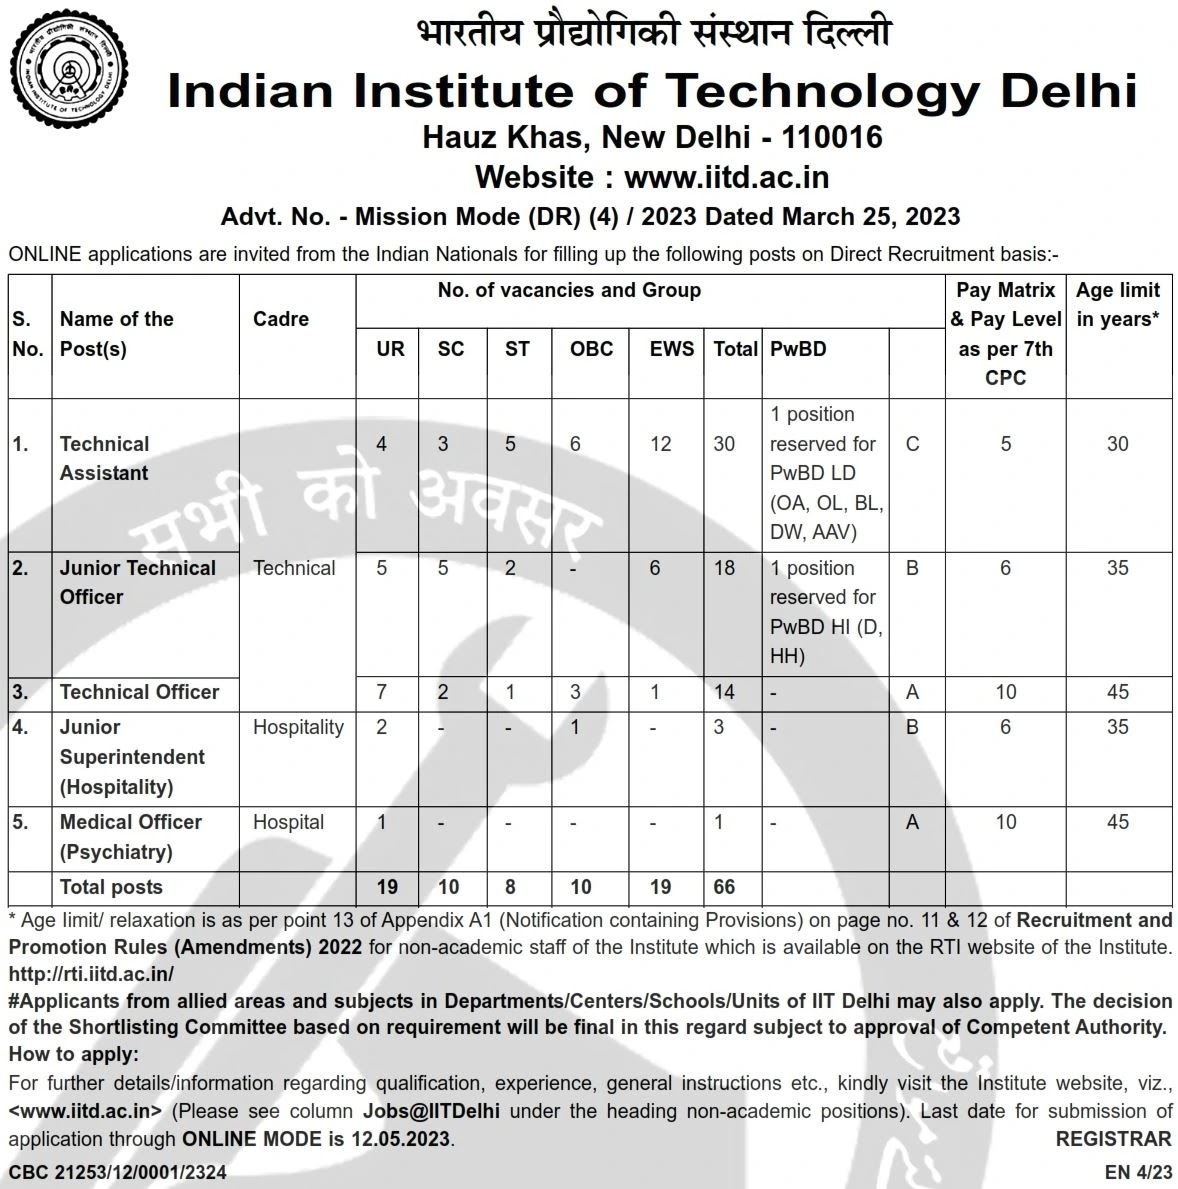 IIT Delhi Recruitment 2020: Apply for 7 Senior Project Scientist and other  Post at iitd.ac.in, Check How to Apply – PaGaLGuY